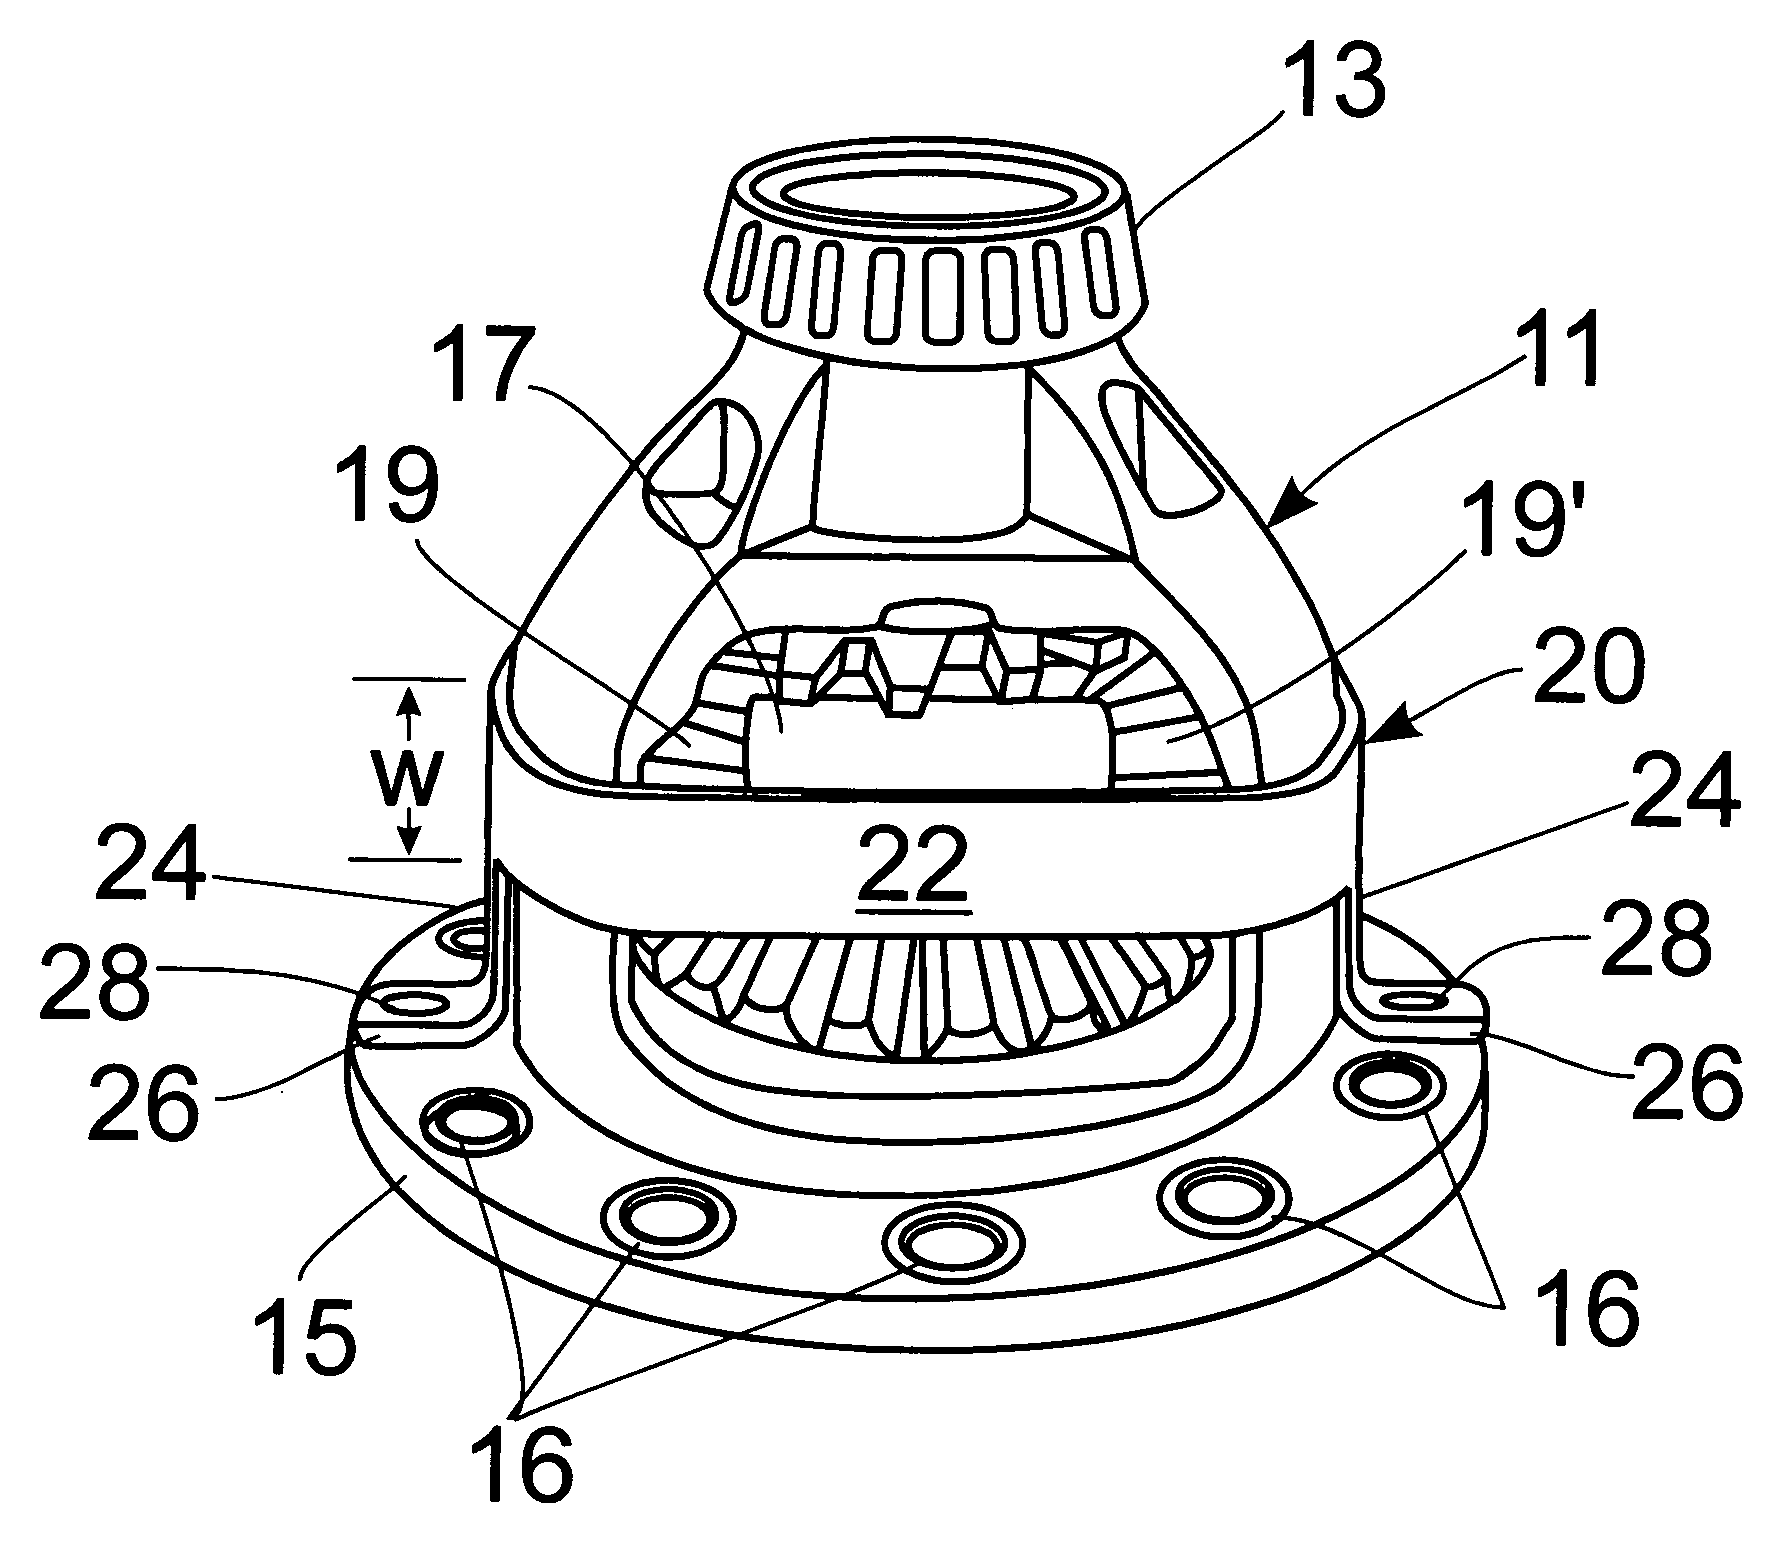 Retainer sleeve for transmission gear axle